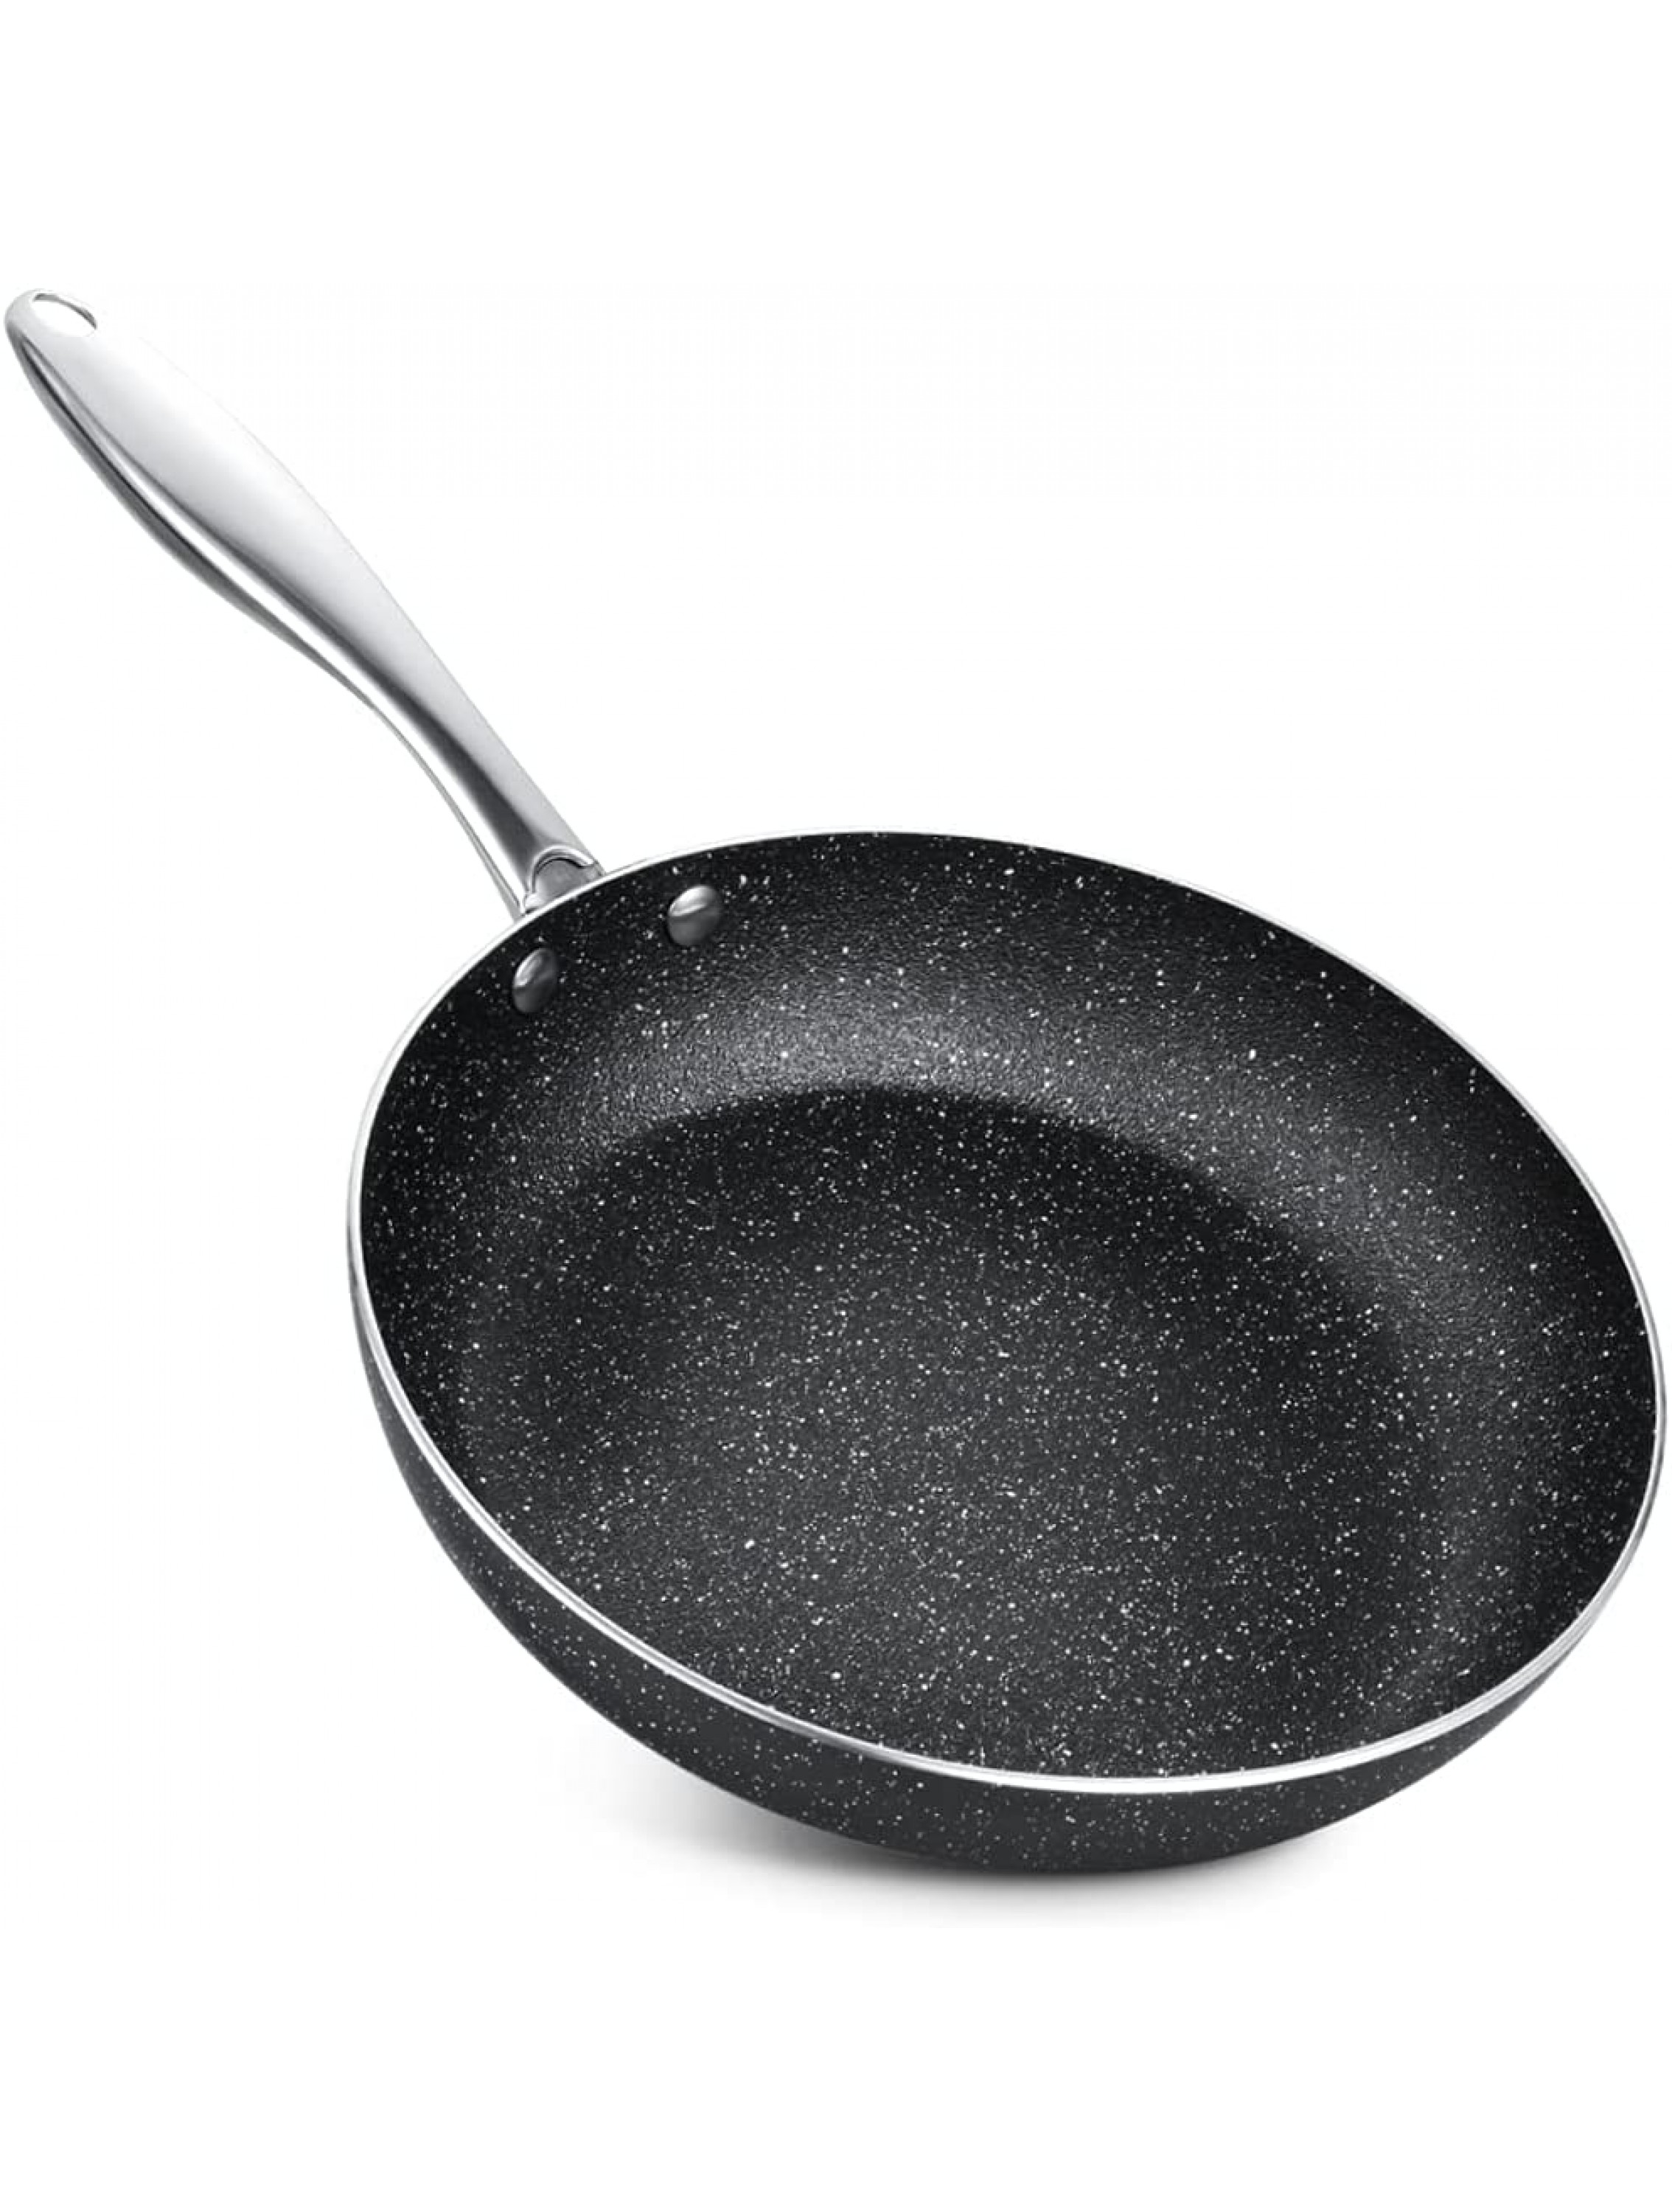 9.5 Inch Nonstick Frying Pan Non Stick Skillet with Stainless Steel Handle Omelet Chef’s Pan with Granite Coating-PFOA Free Oven & Dishwasher Safe Black - B6USZ3VXF